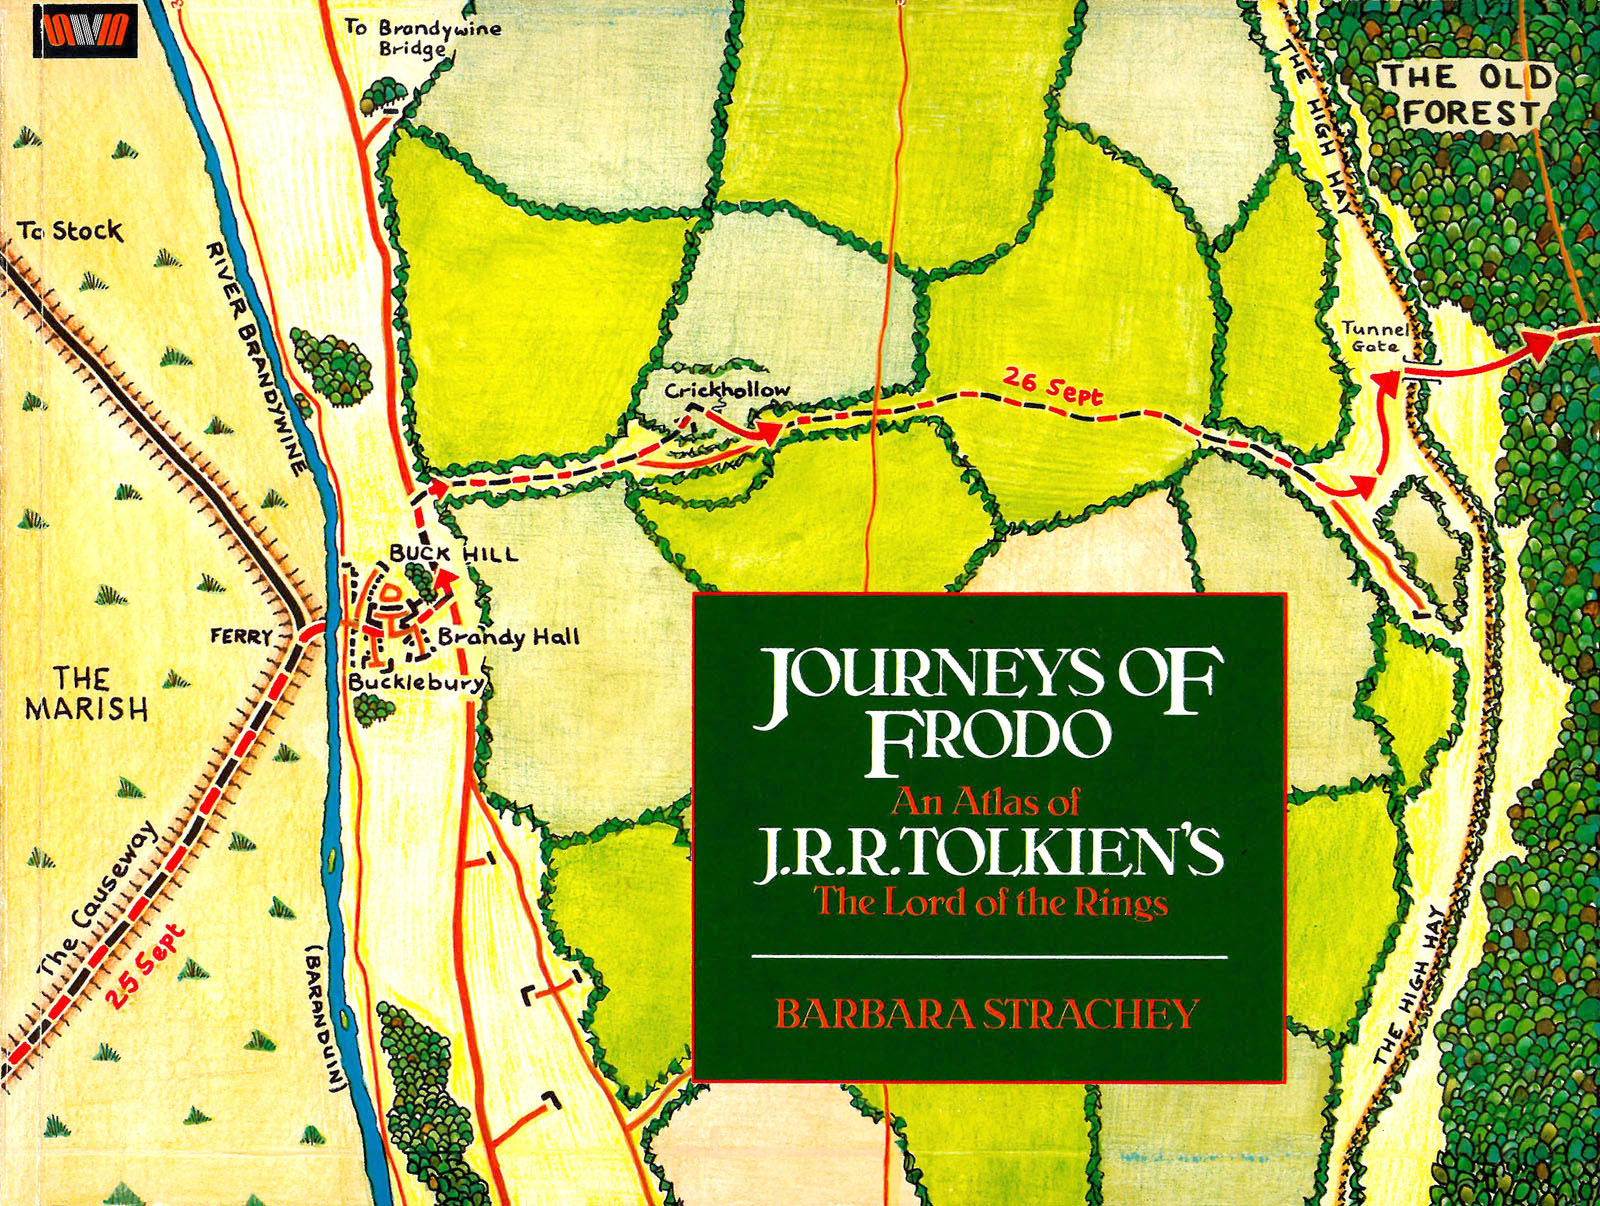 Read online Journeys of Frodo: An Atlas of J.R.R. Tolkien's The Lord of the Rings comic -  Issue # TPB - 1